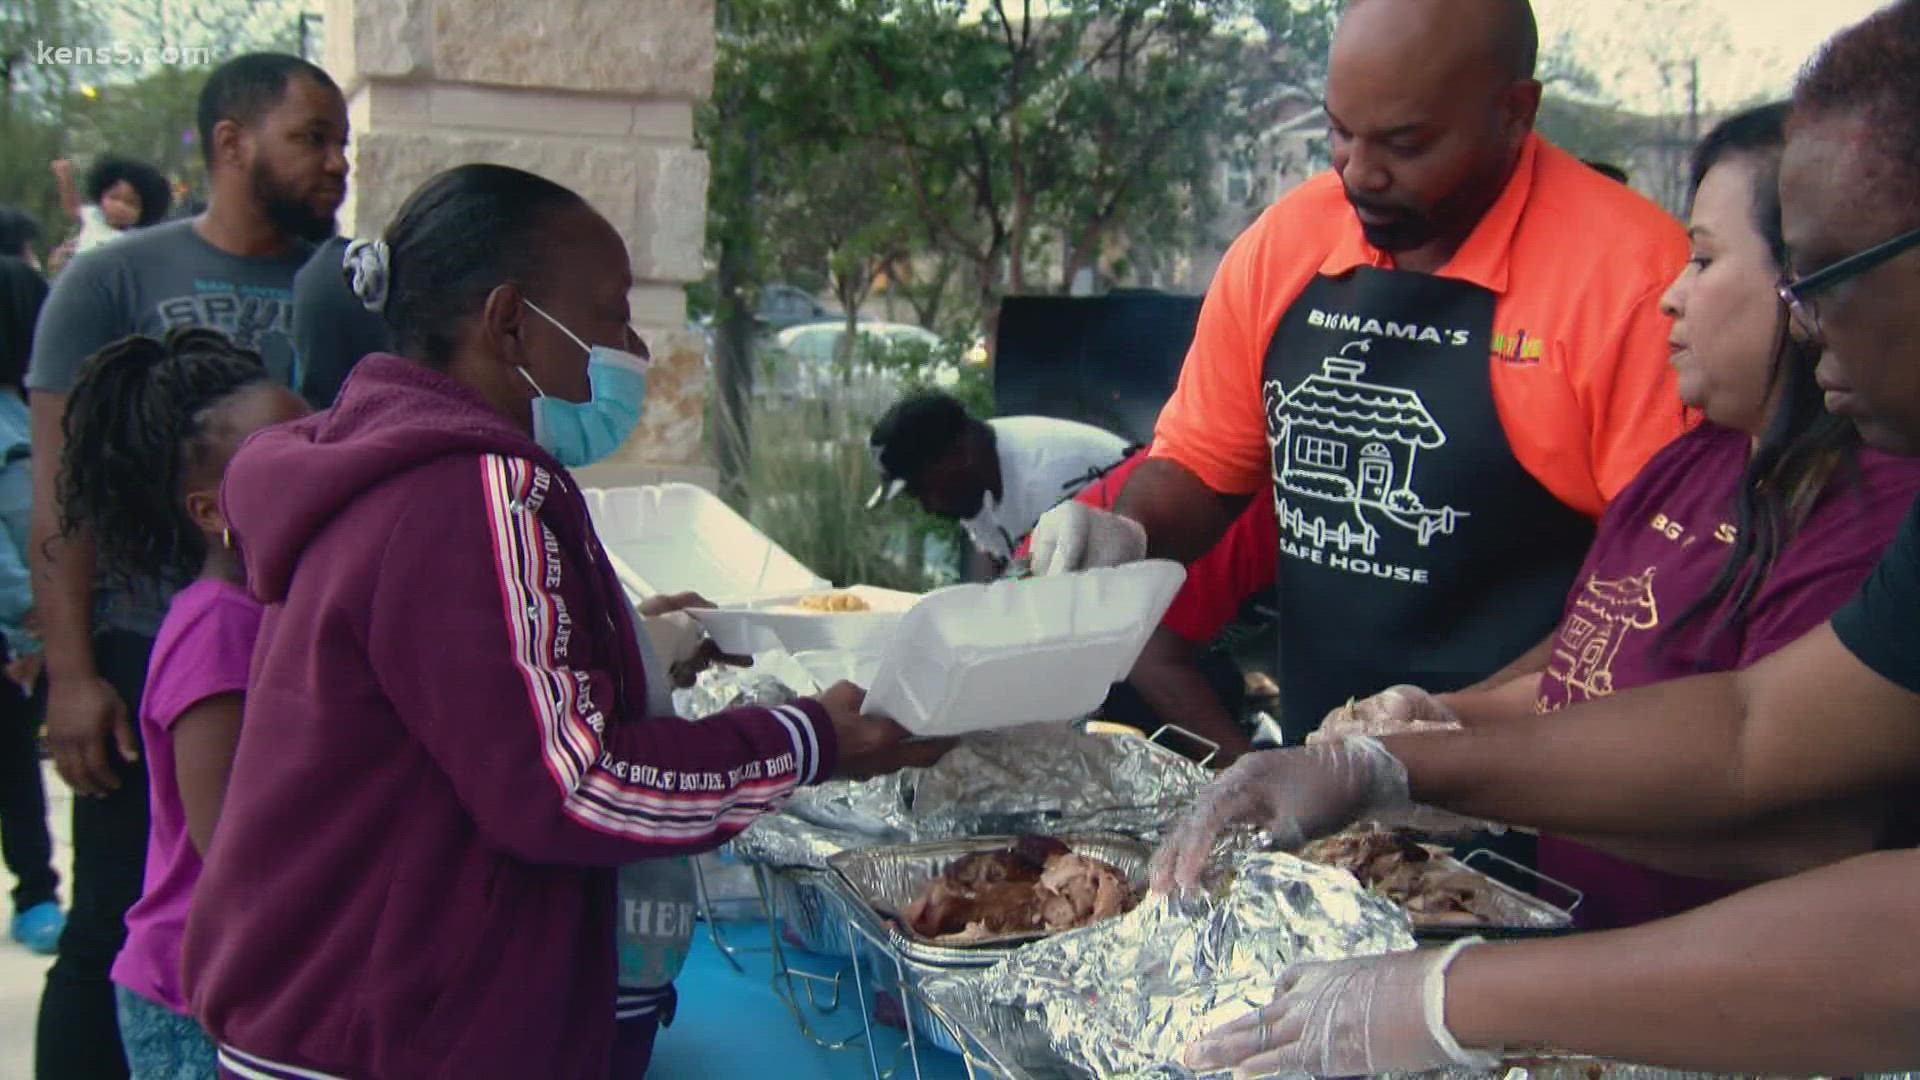 Volunteers with Big Mama's Safe House filled plates with the traditional Thanksgiving fixins and welcomed anyone who was hungry.